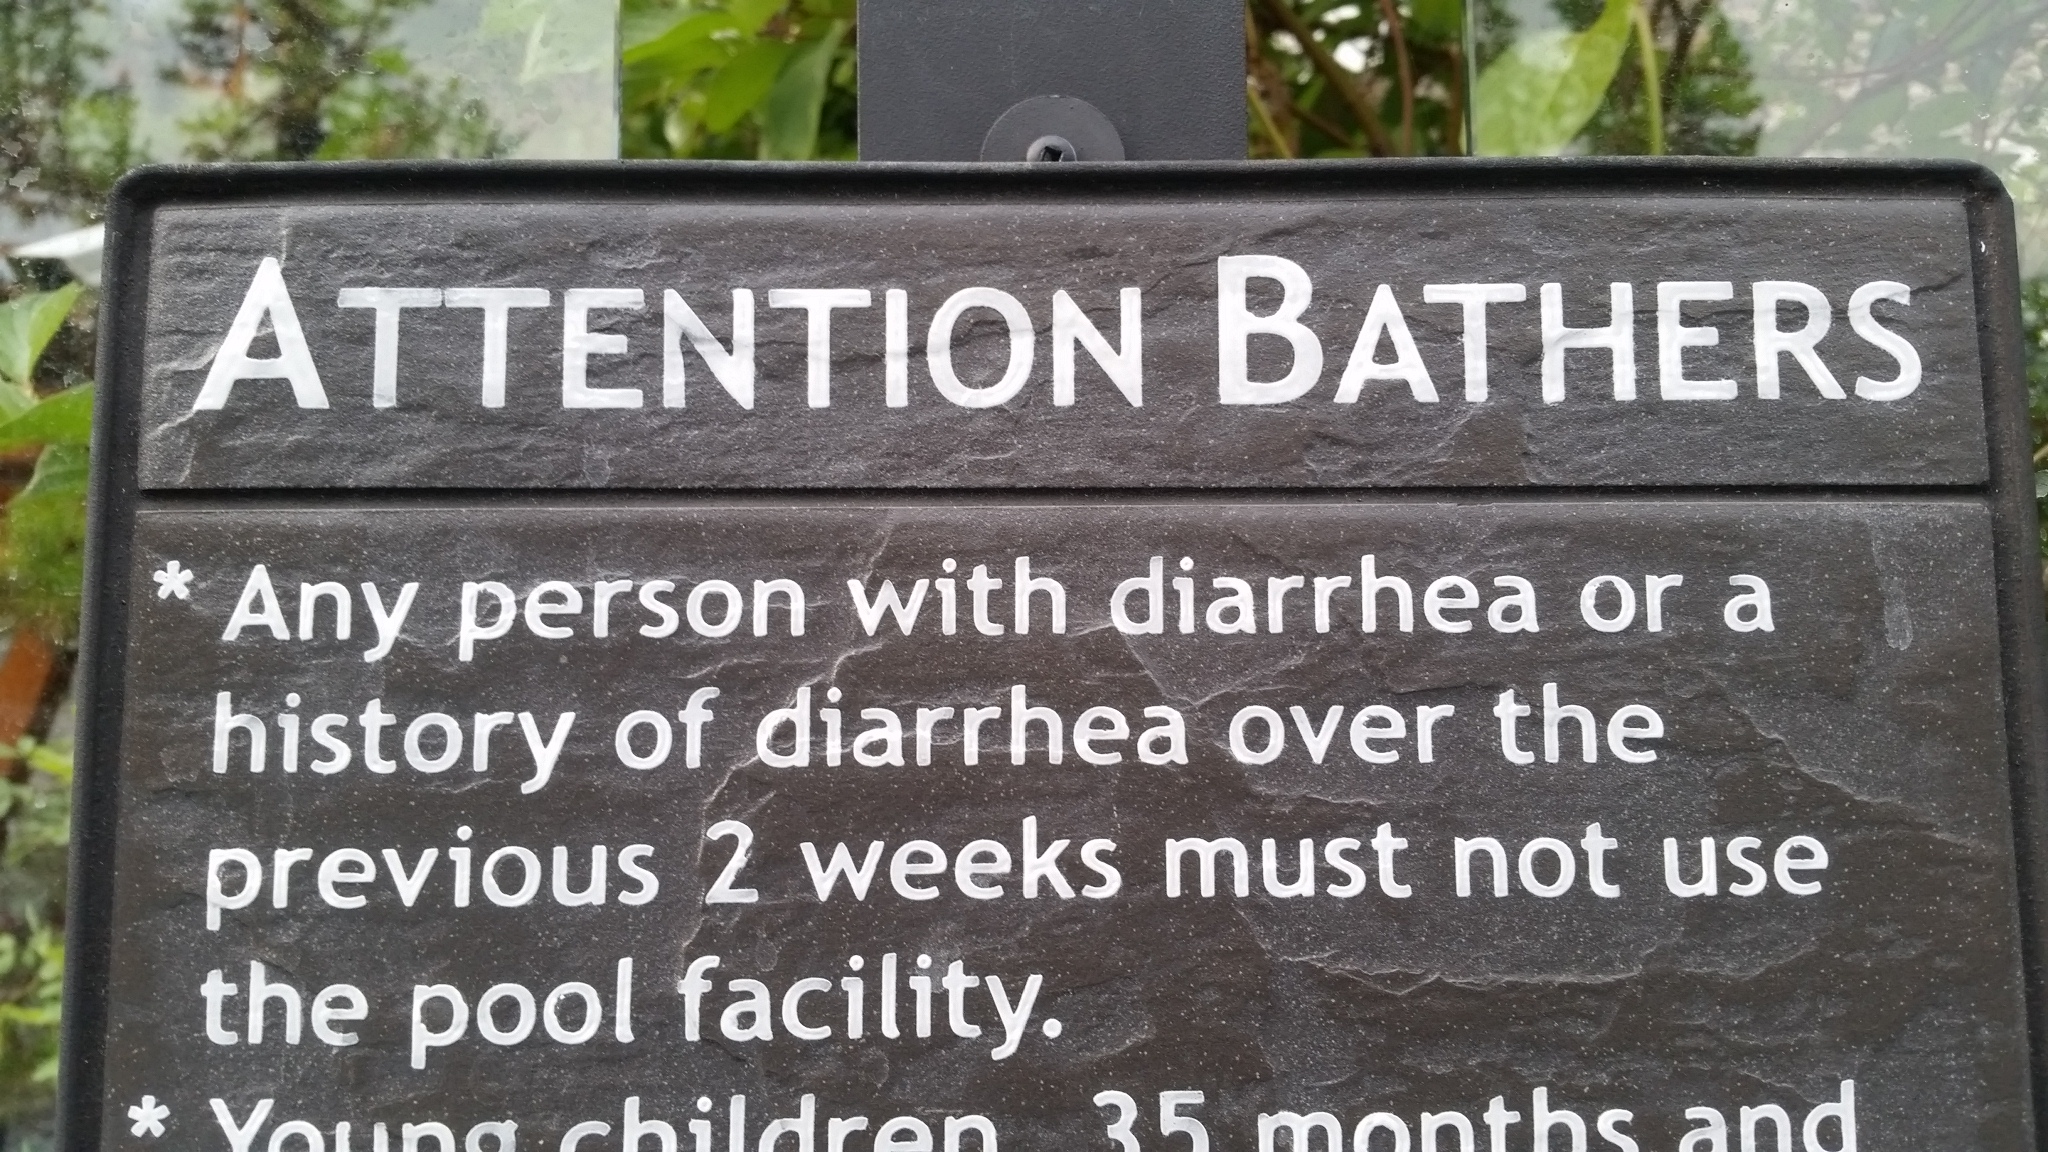 Funny picture of a strange sign warning bathers with diarrhea to stay out of the pool